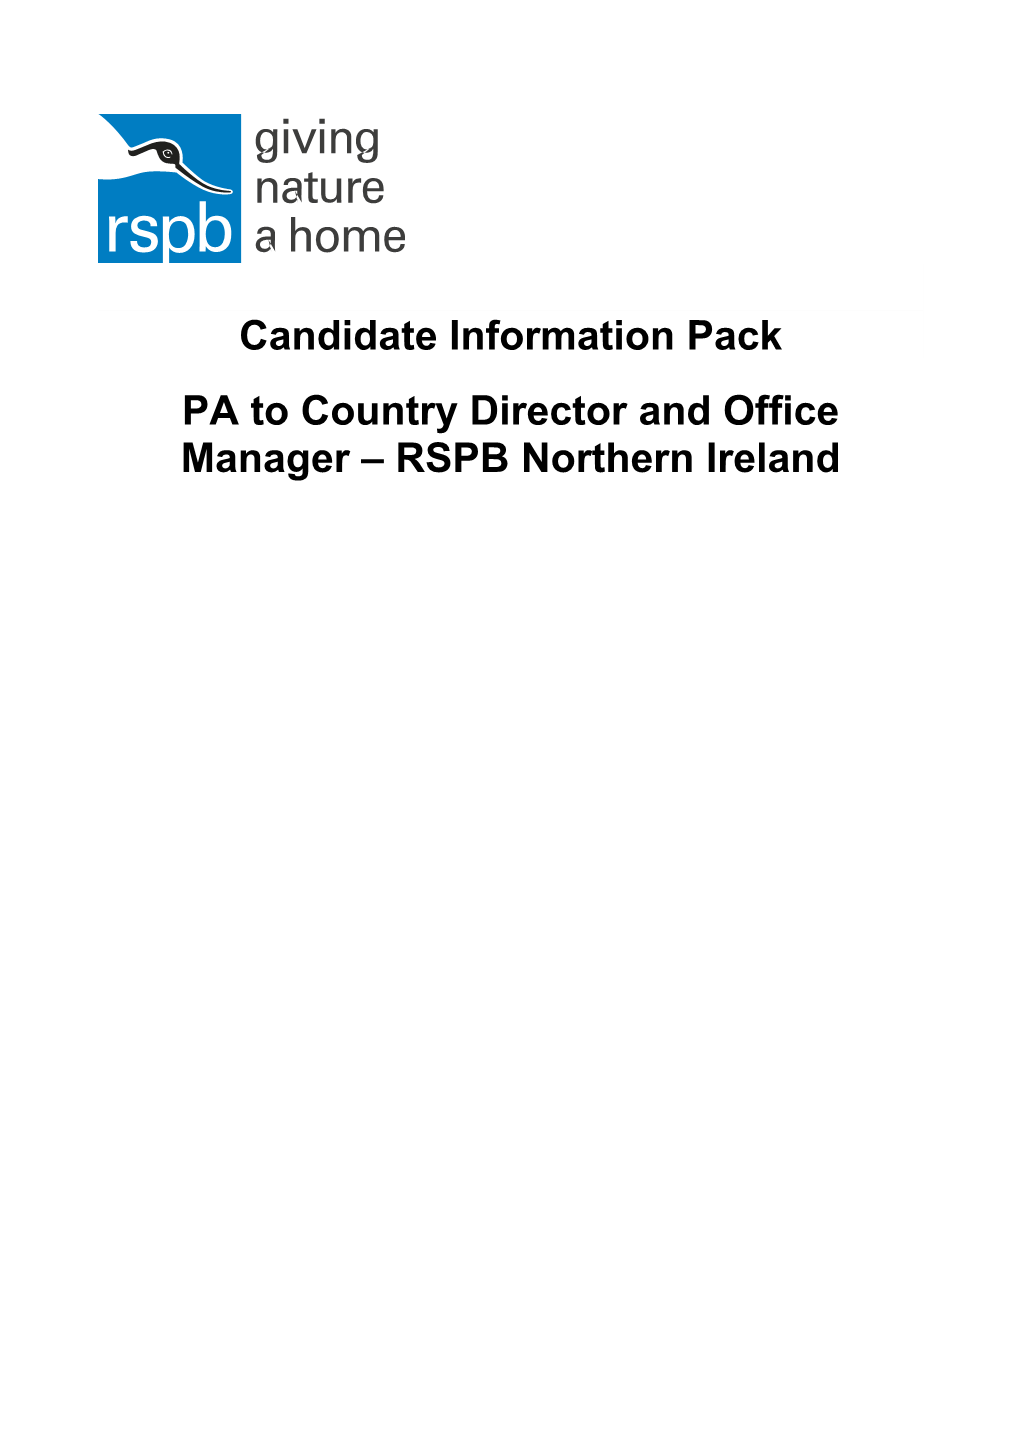 PA to Country Director and Office Manager RSPB Northern Ireland